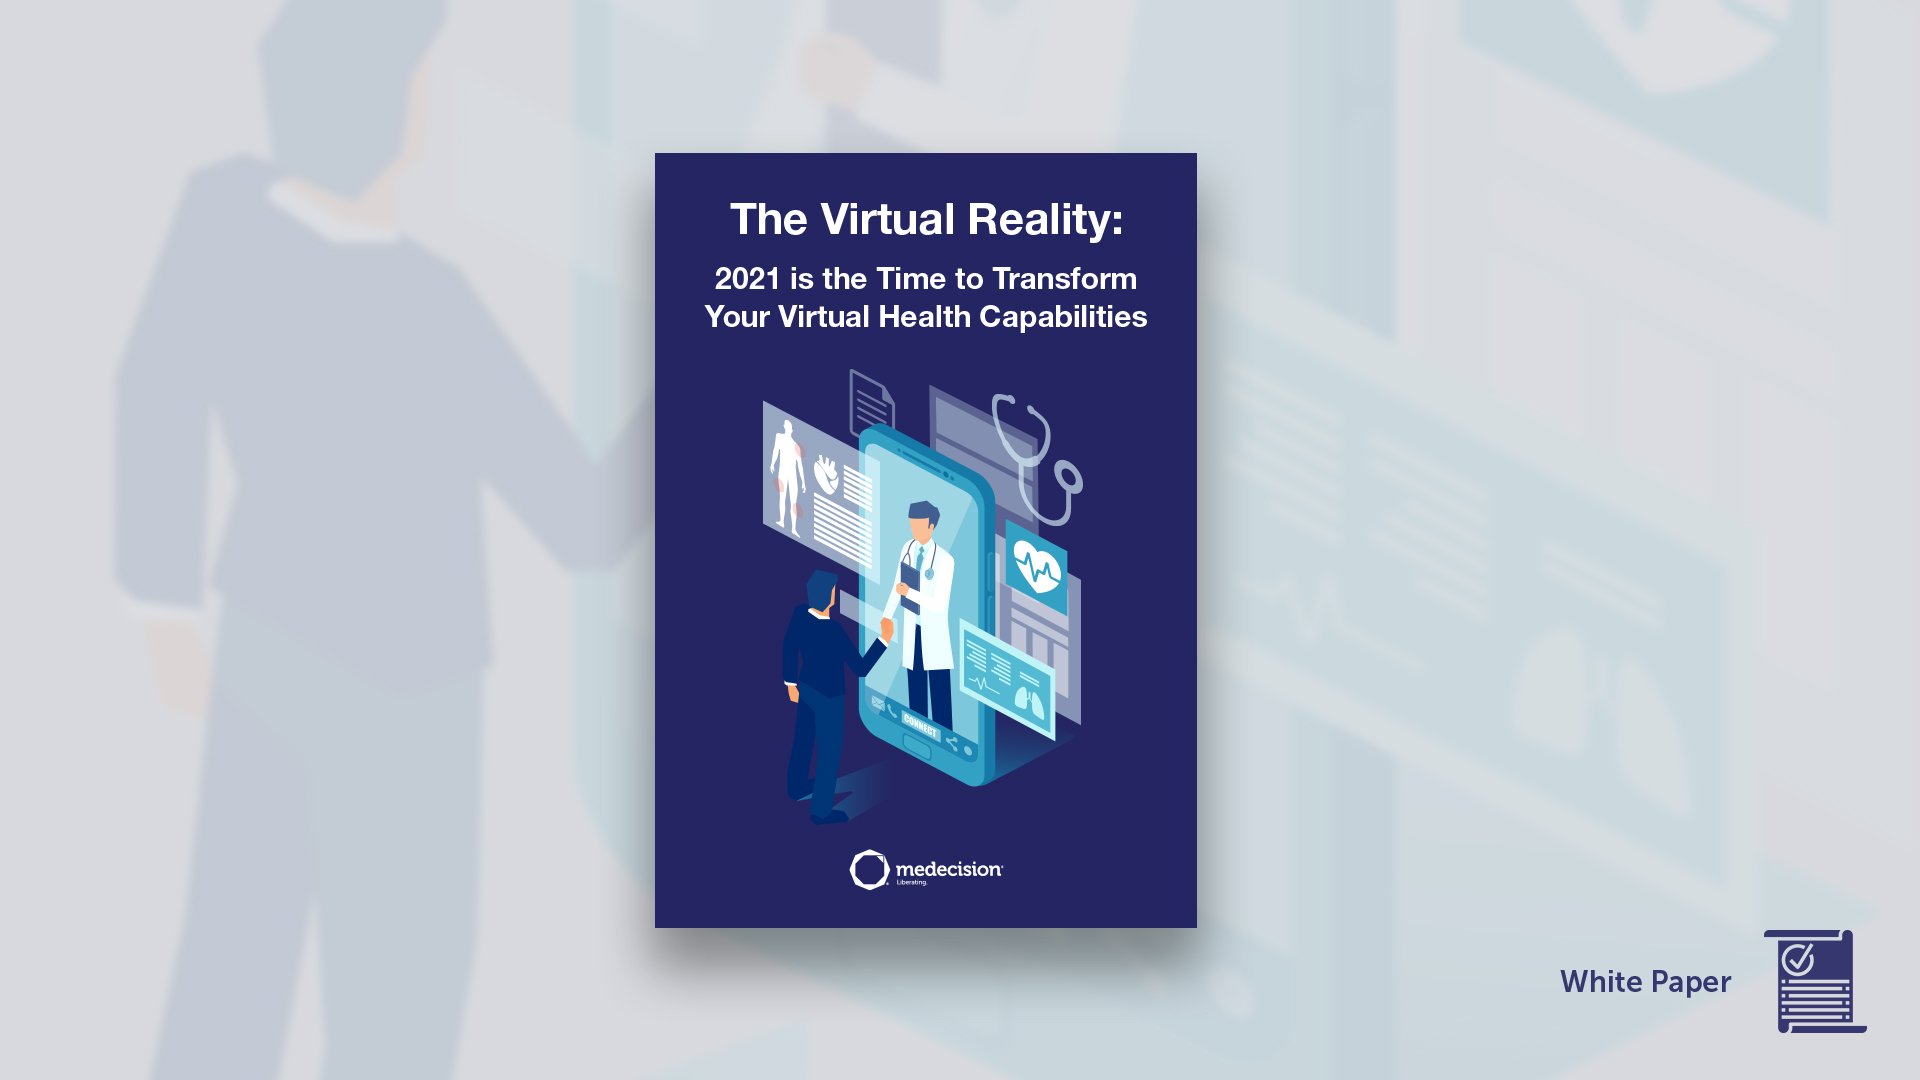 The Virtual Reality - 2021 Is the Time to Transform Your Virtual Health Capabilities